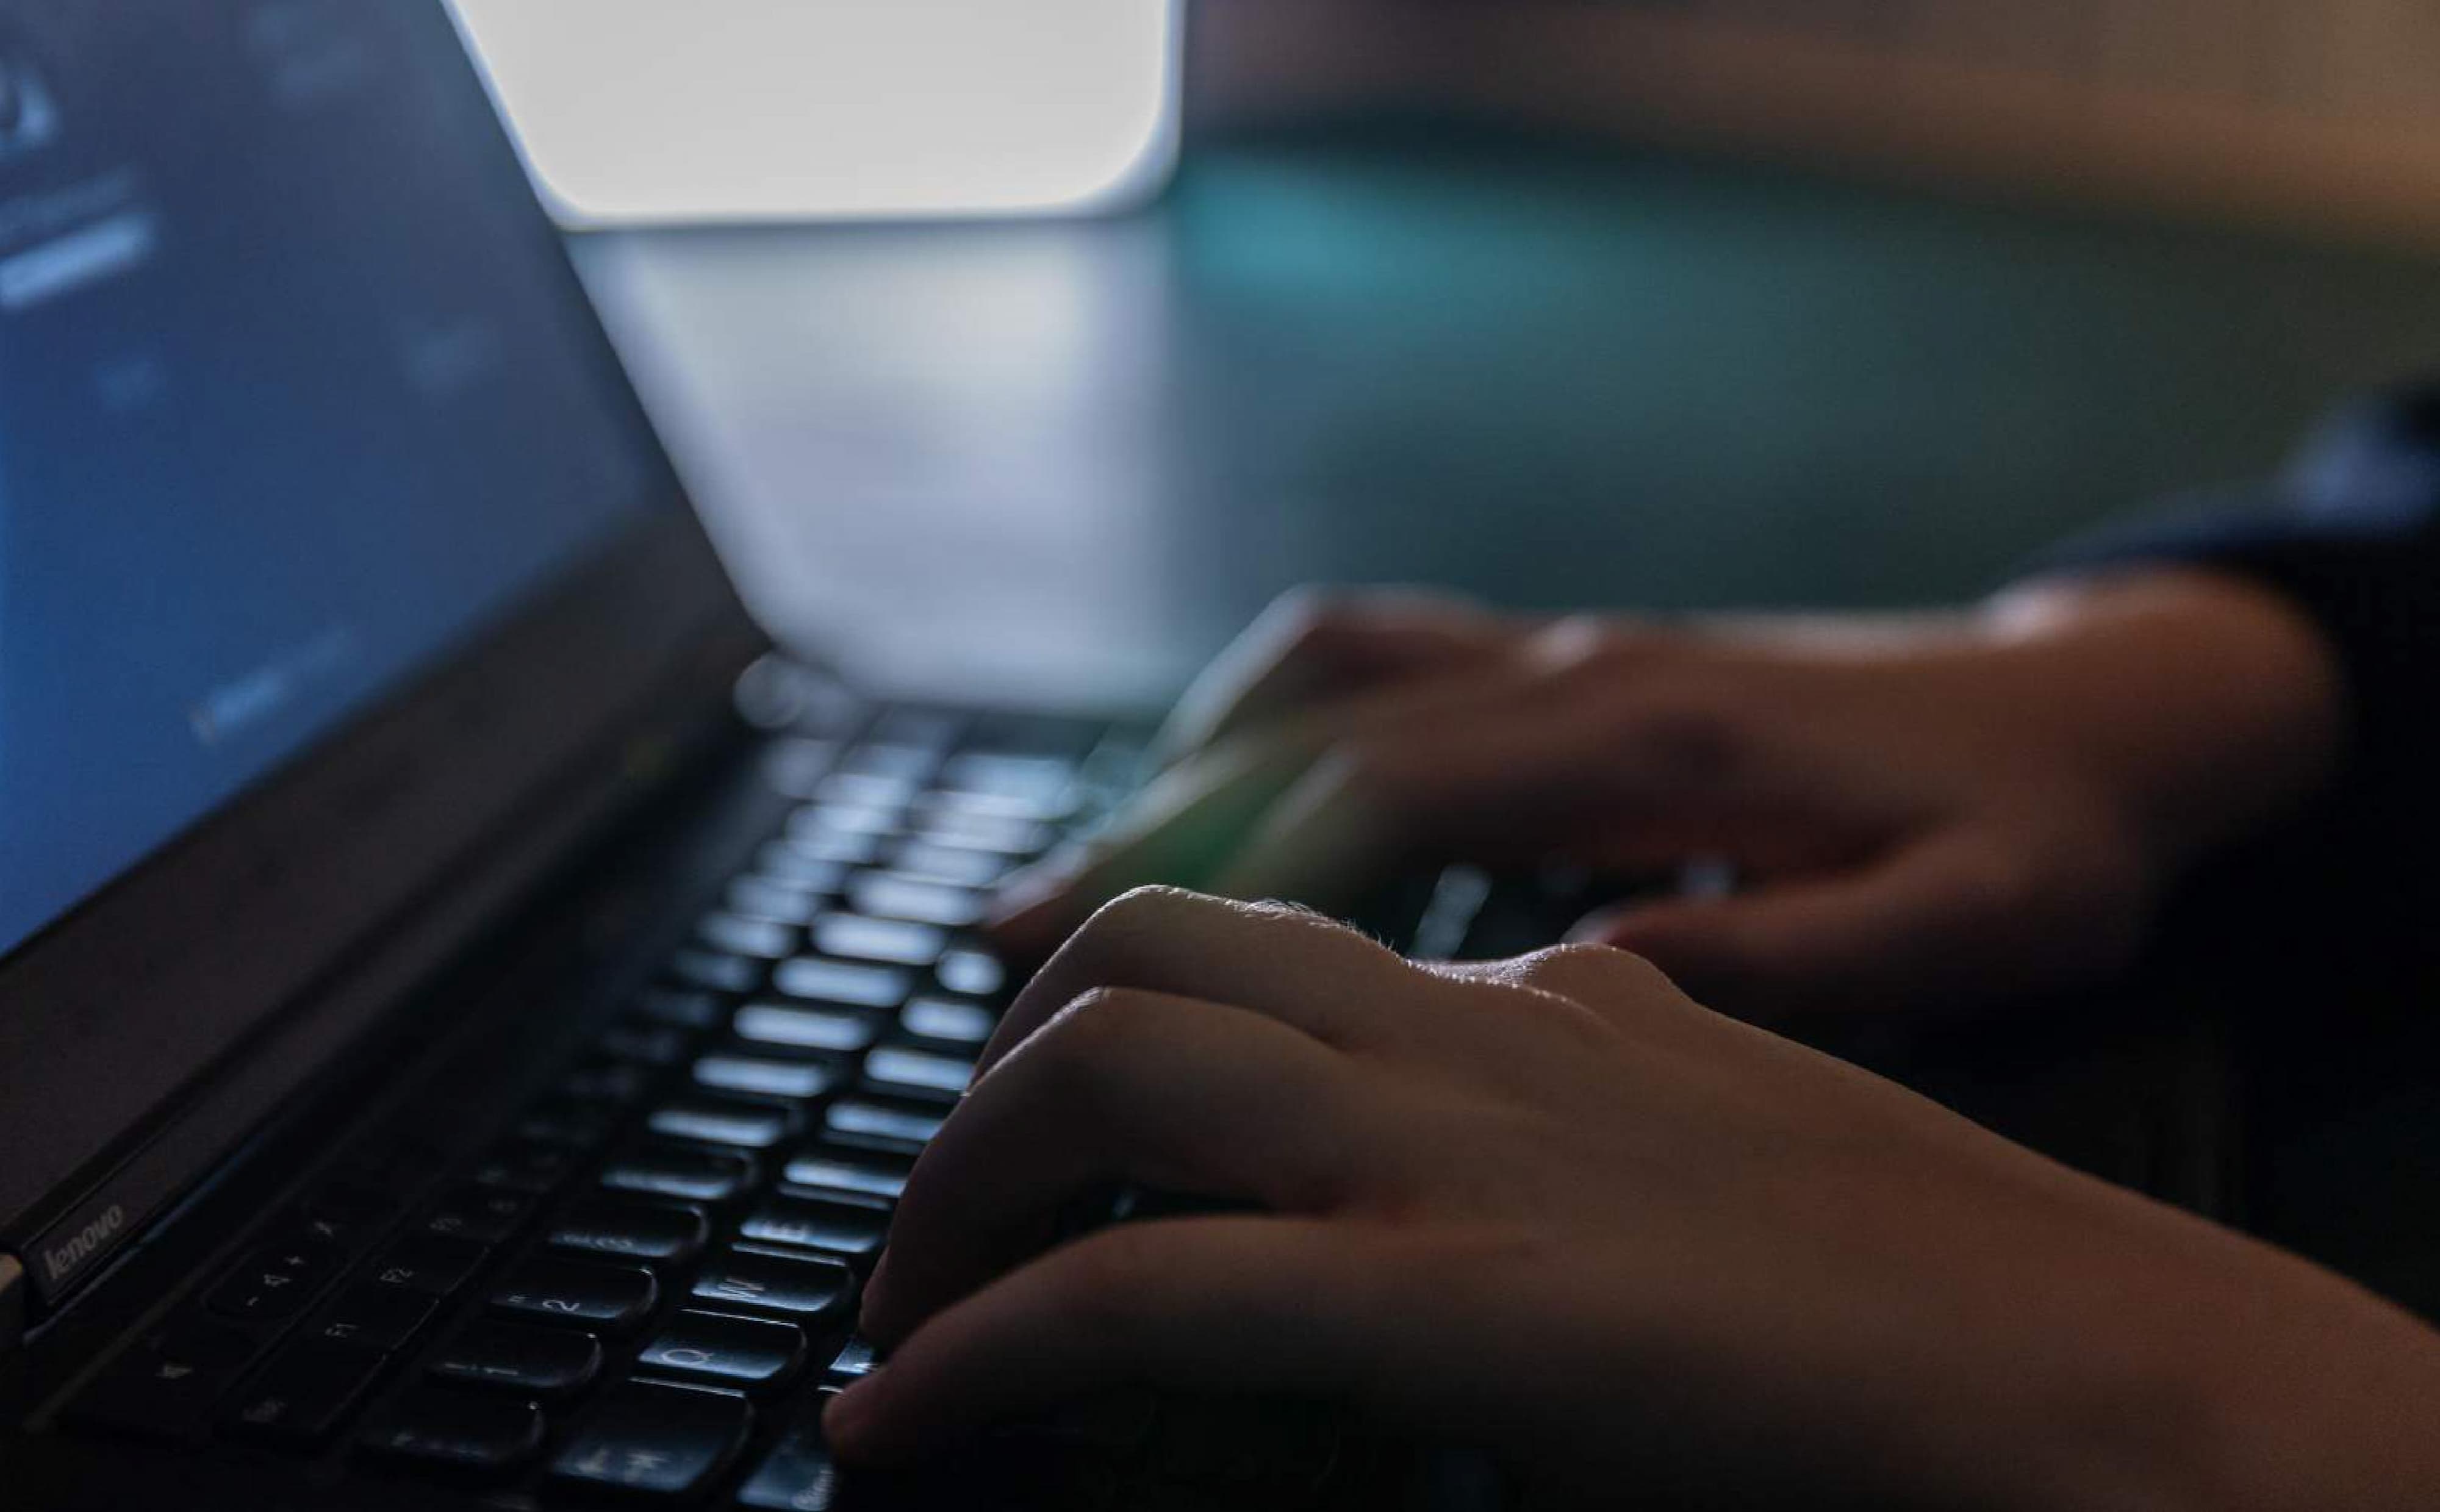 Report: 90% of Online Child Abuse Content 'Self-Generated' Through Extortion